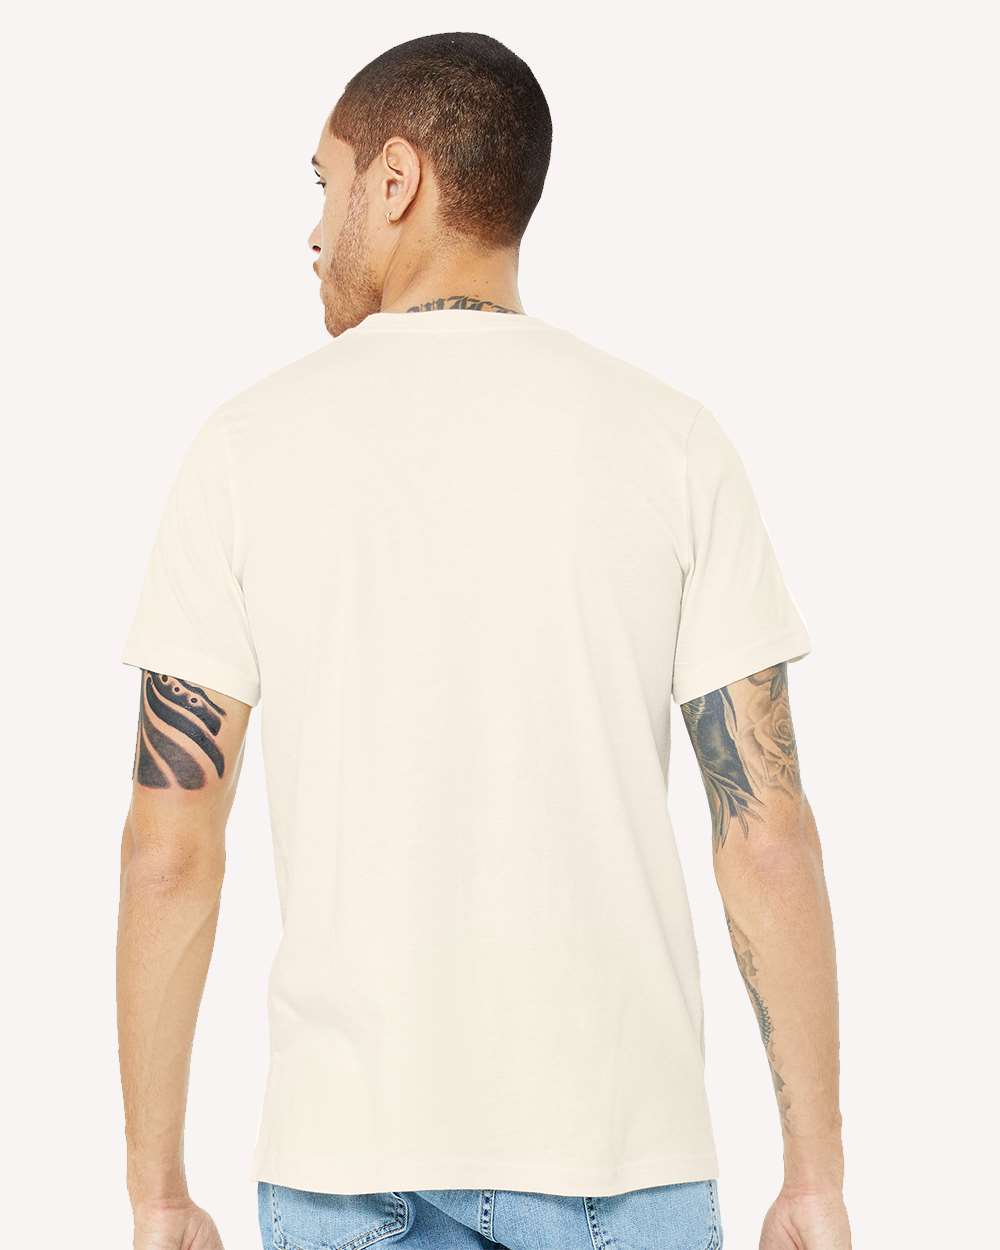 50 for $499 Bella + Canvas Tees